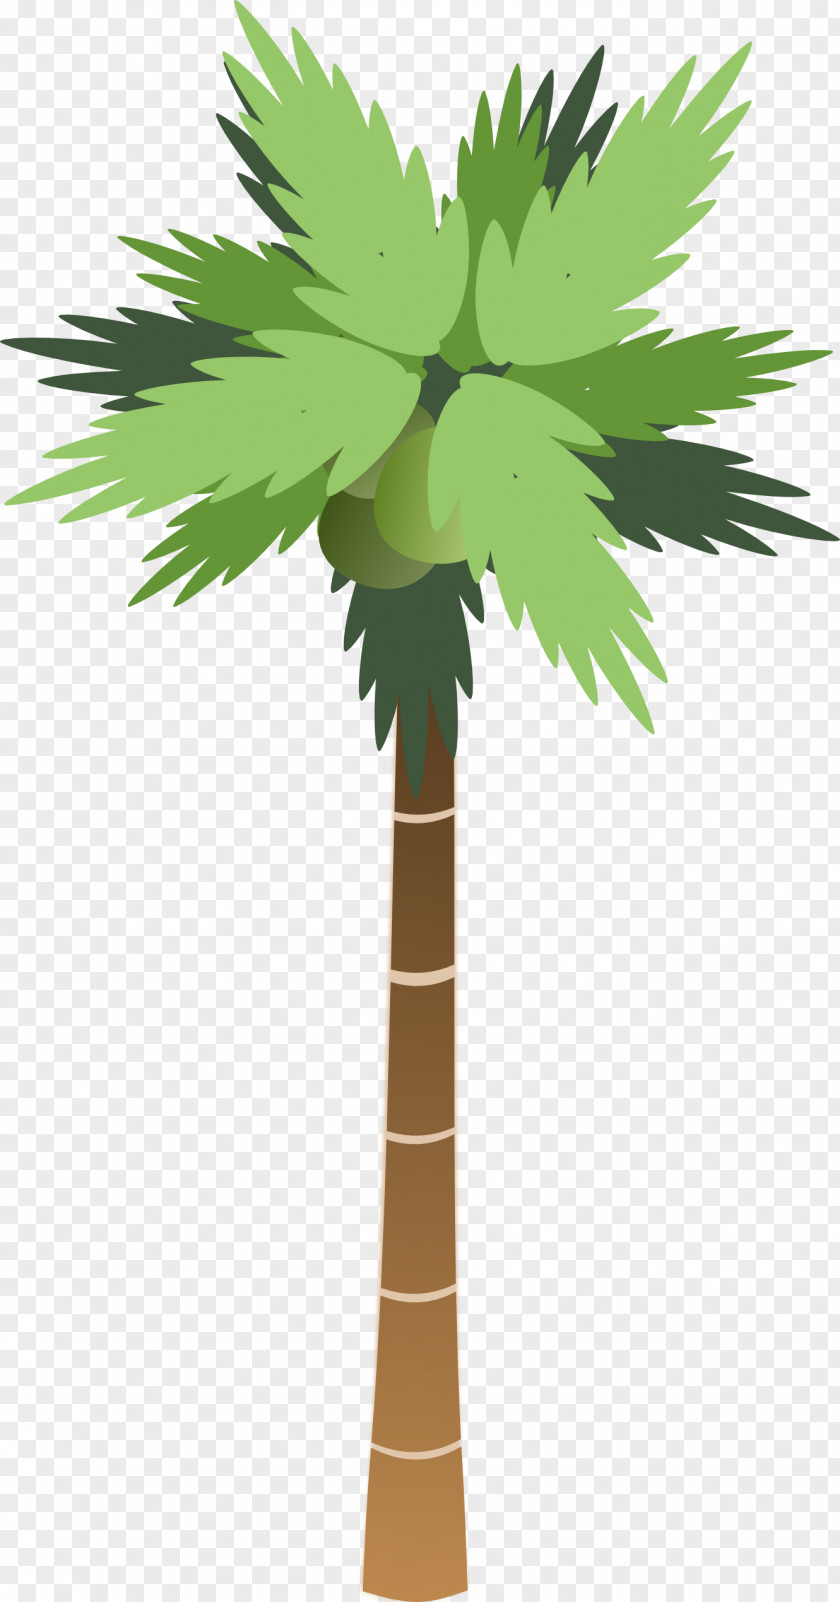 Images Of Cartoon Palm Trees Arecaceae Coconut Tree Clip Art PNG